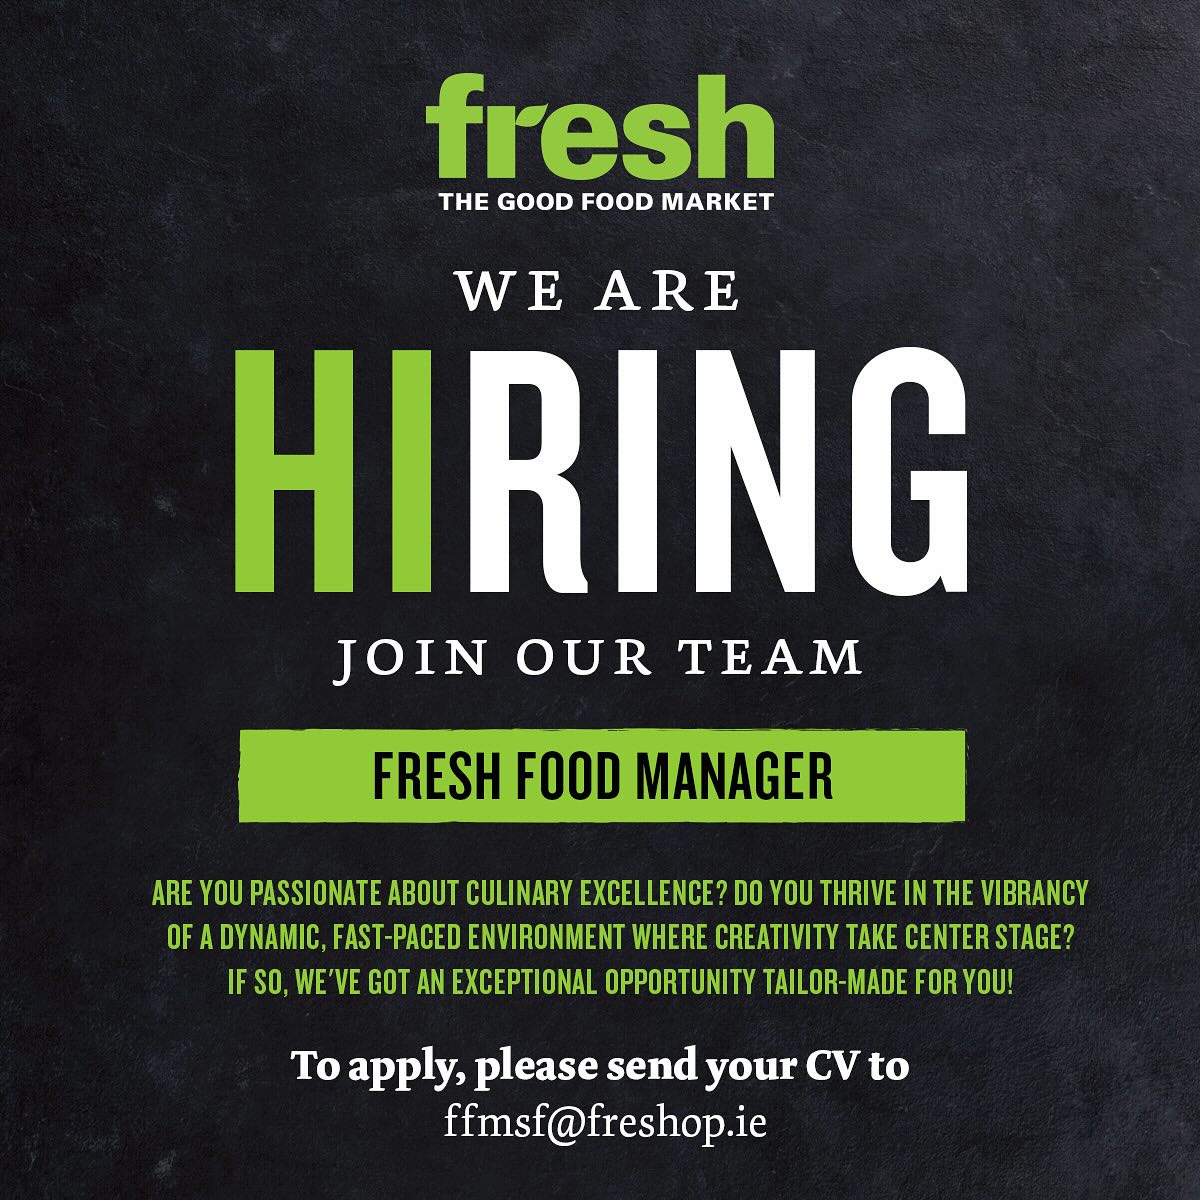 Join Our Team!
Are you a culinary enthusiast with a zest for innovation? We’re on the hunt for a Fresh Food Manager! If you’re passionate about crafting culinary delights & thrive in a fast-paced environment, please send your CV to ffmsf@freshop.ie
#dublinjobs